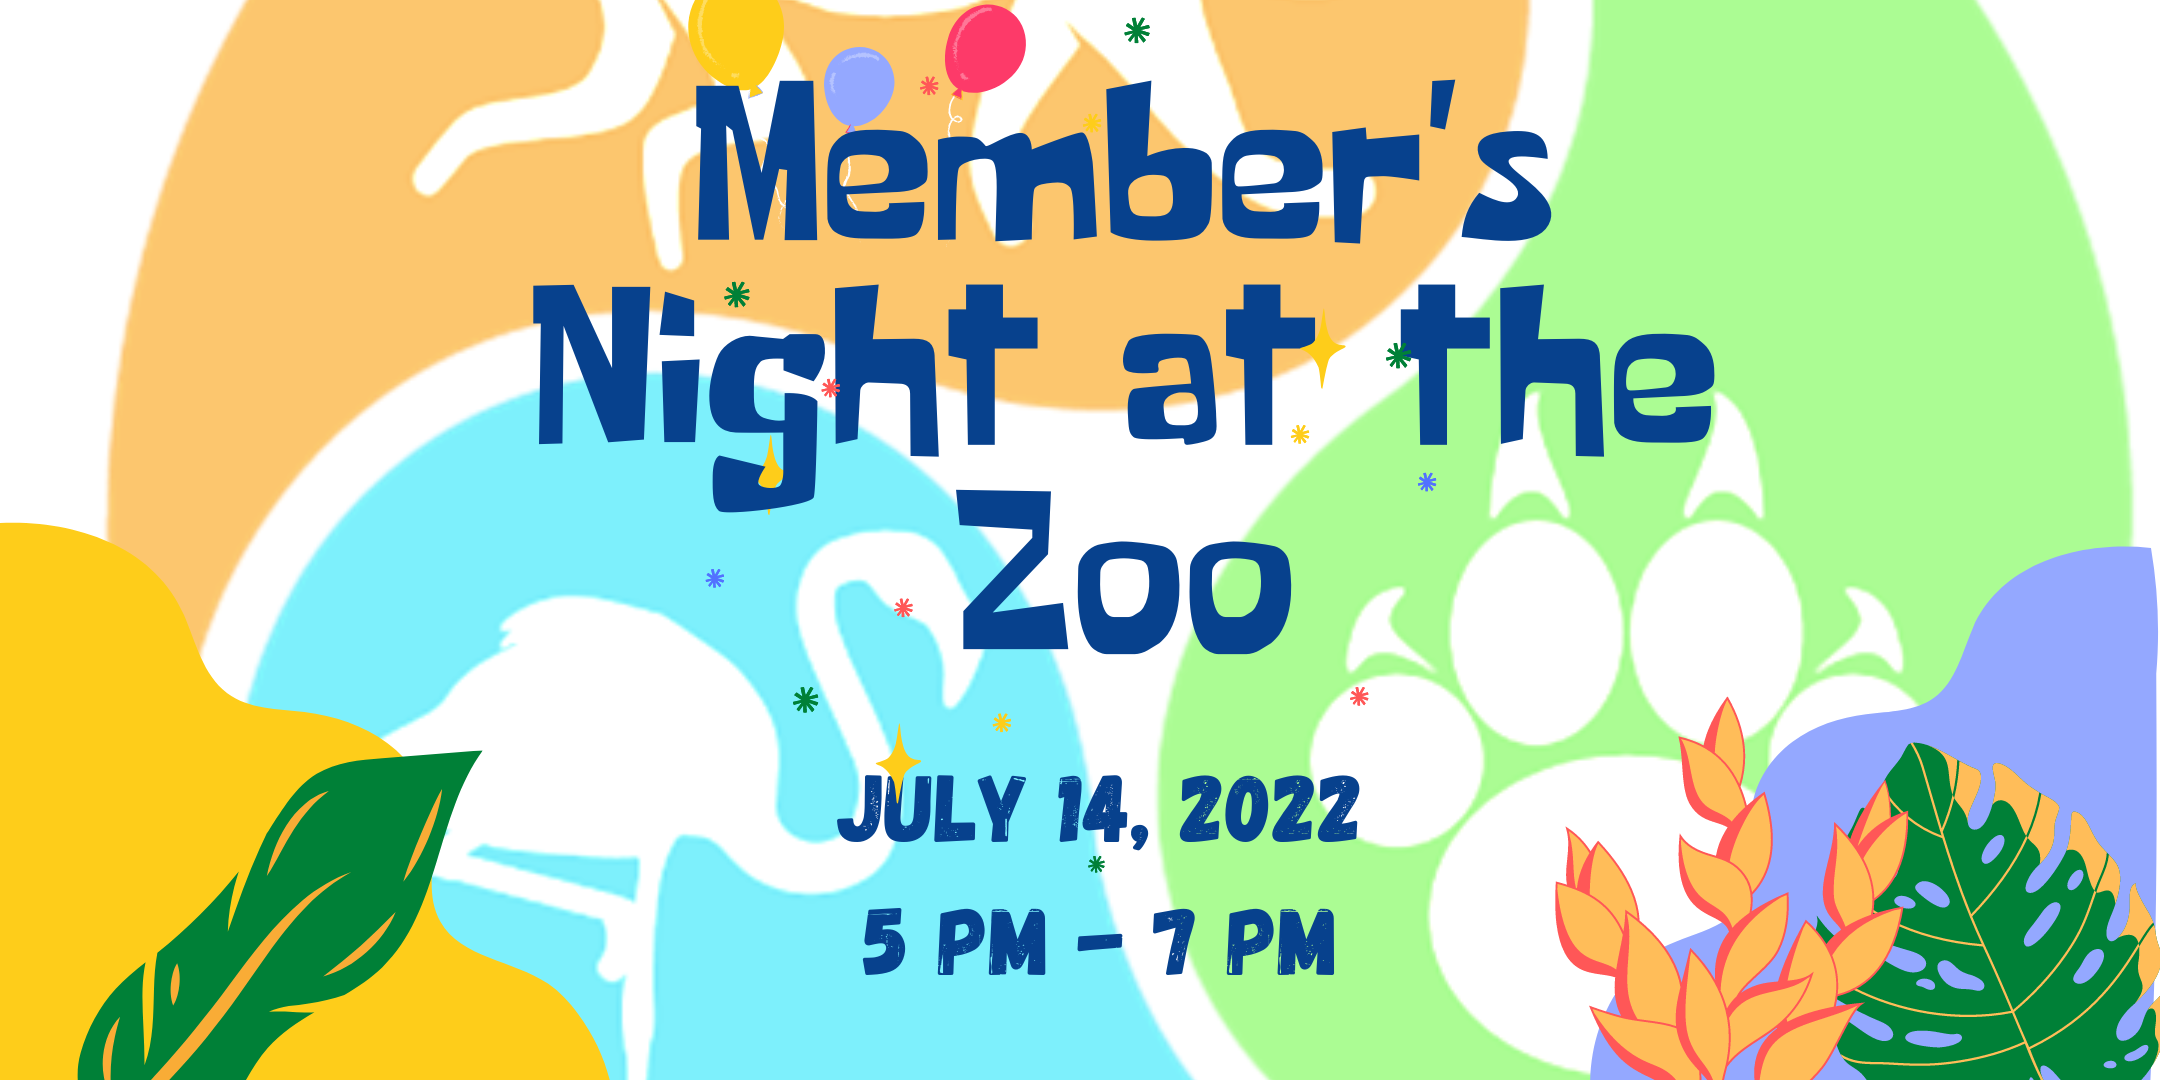 Member's Night is July 14 from 5-7